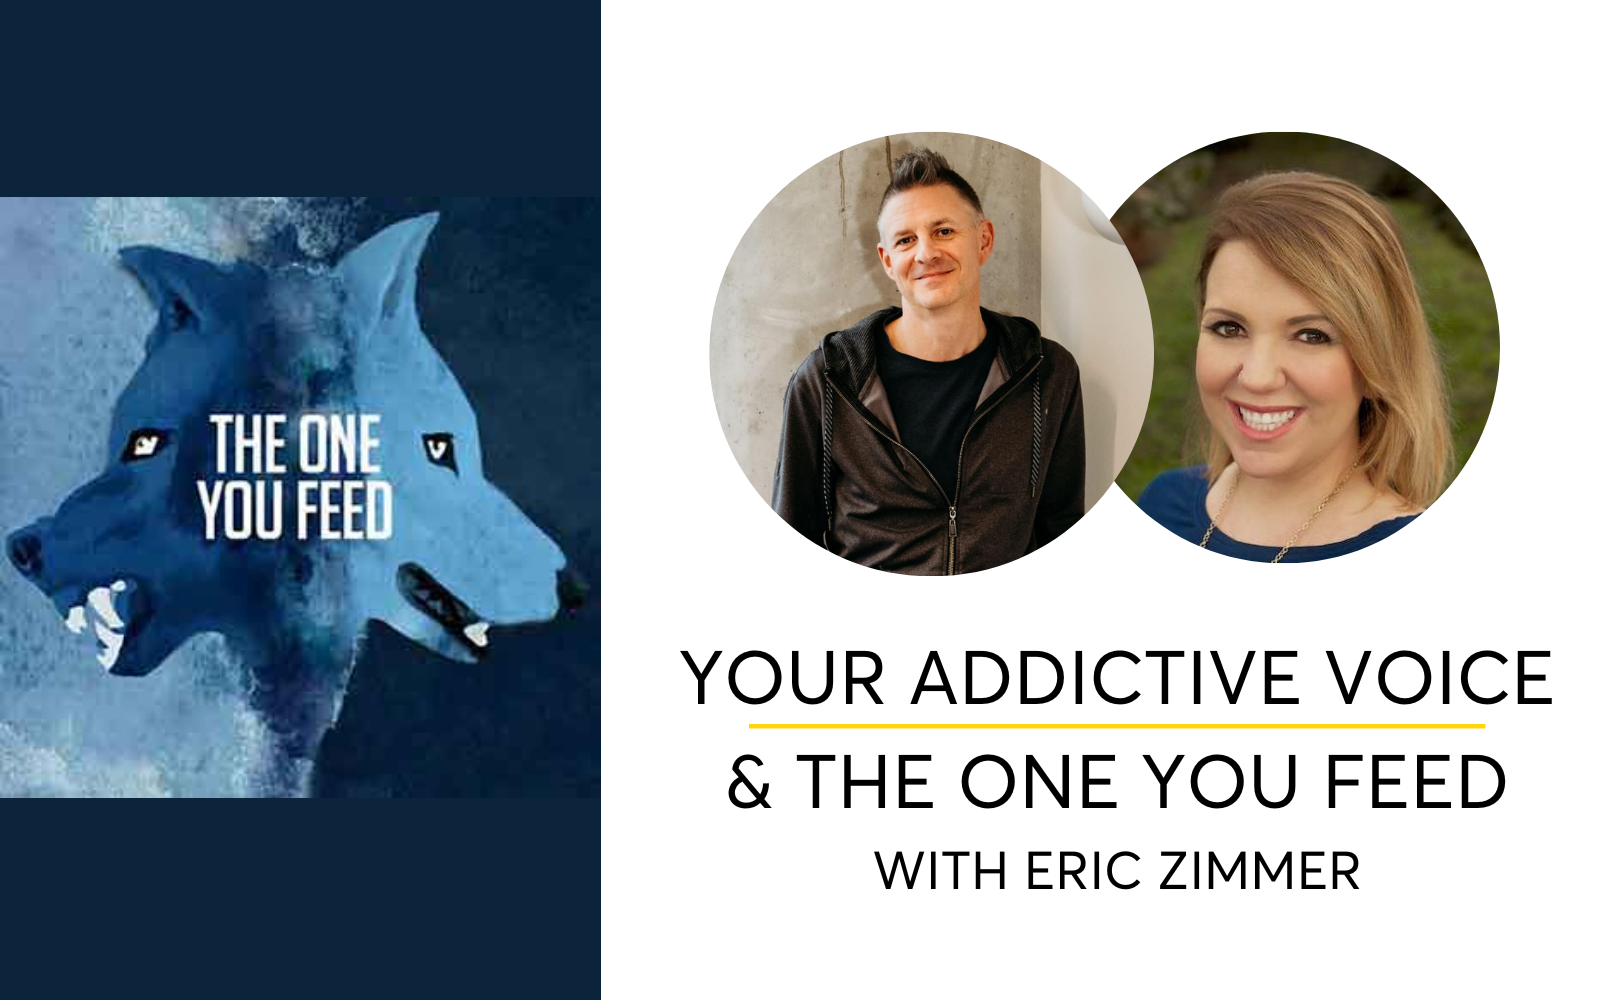 Your Addictive Voice and The One You Feed